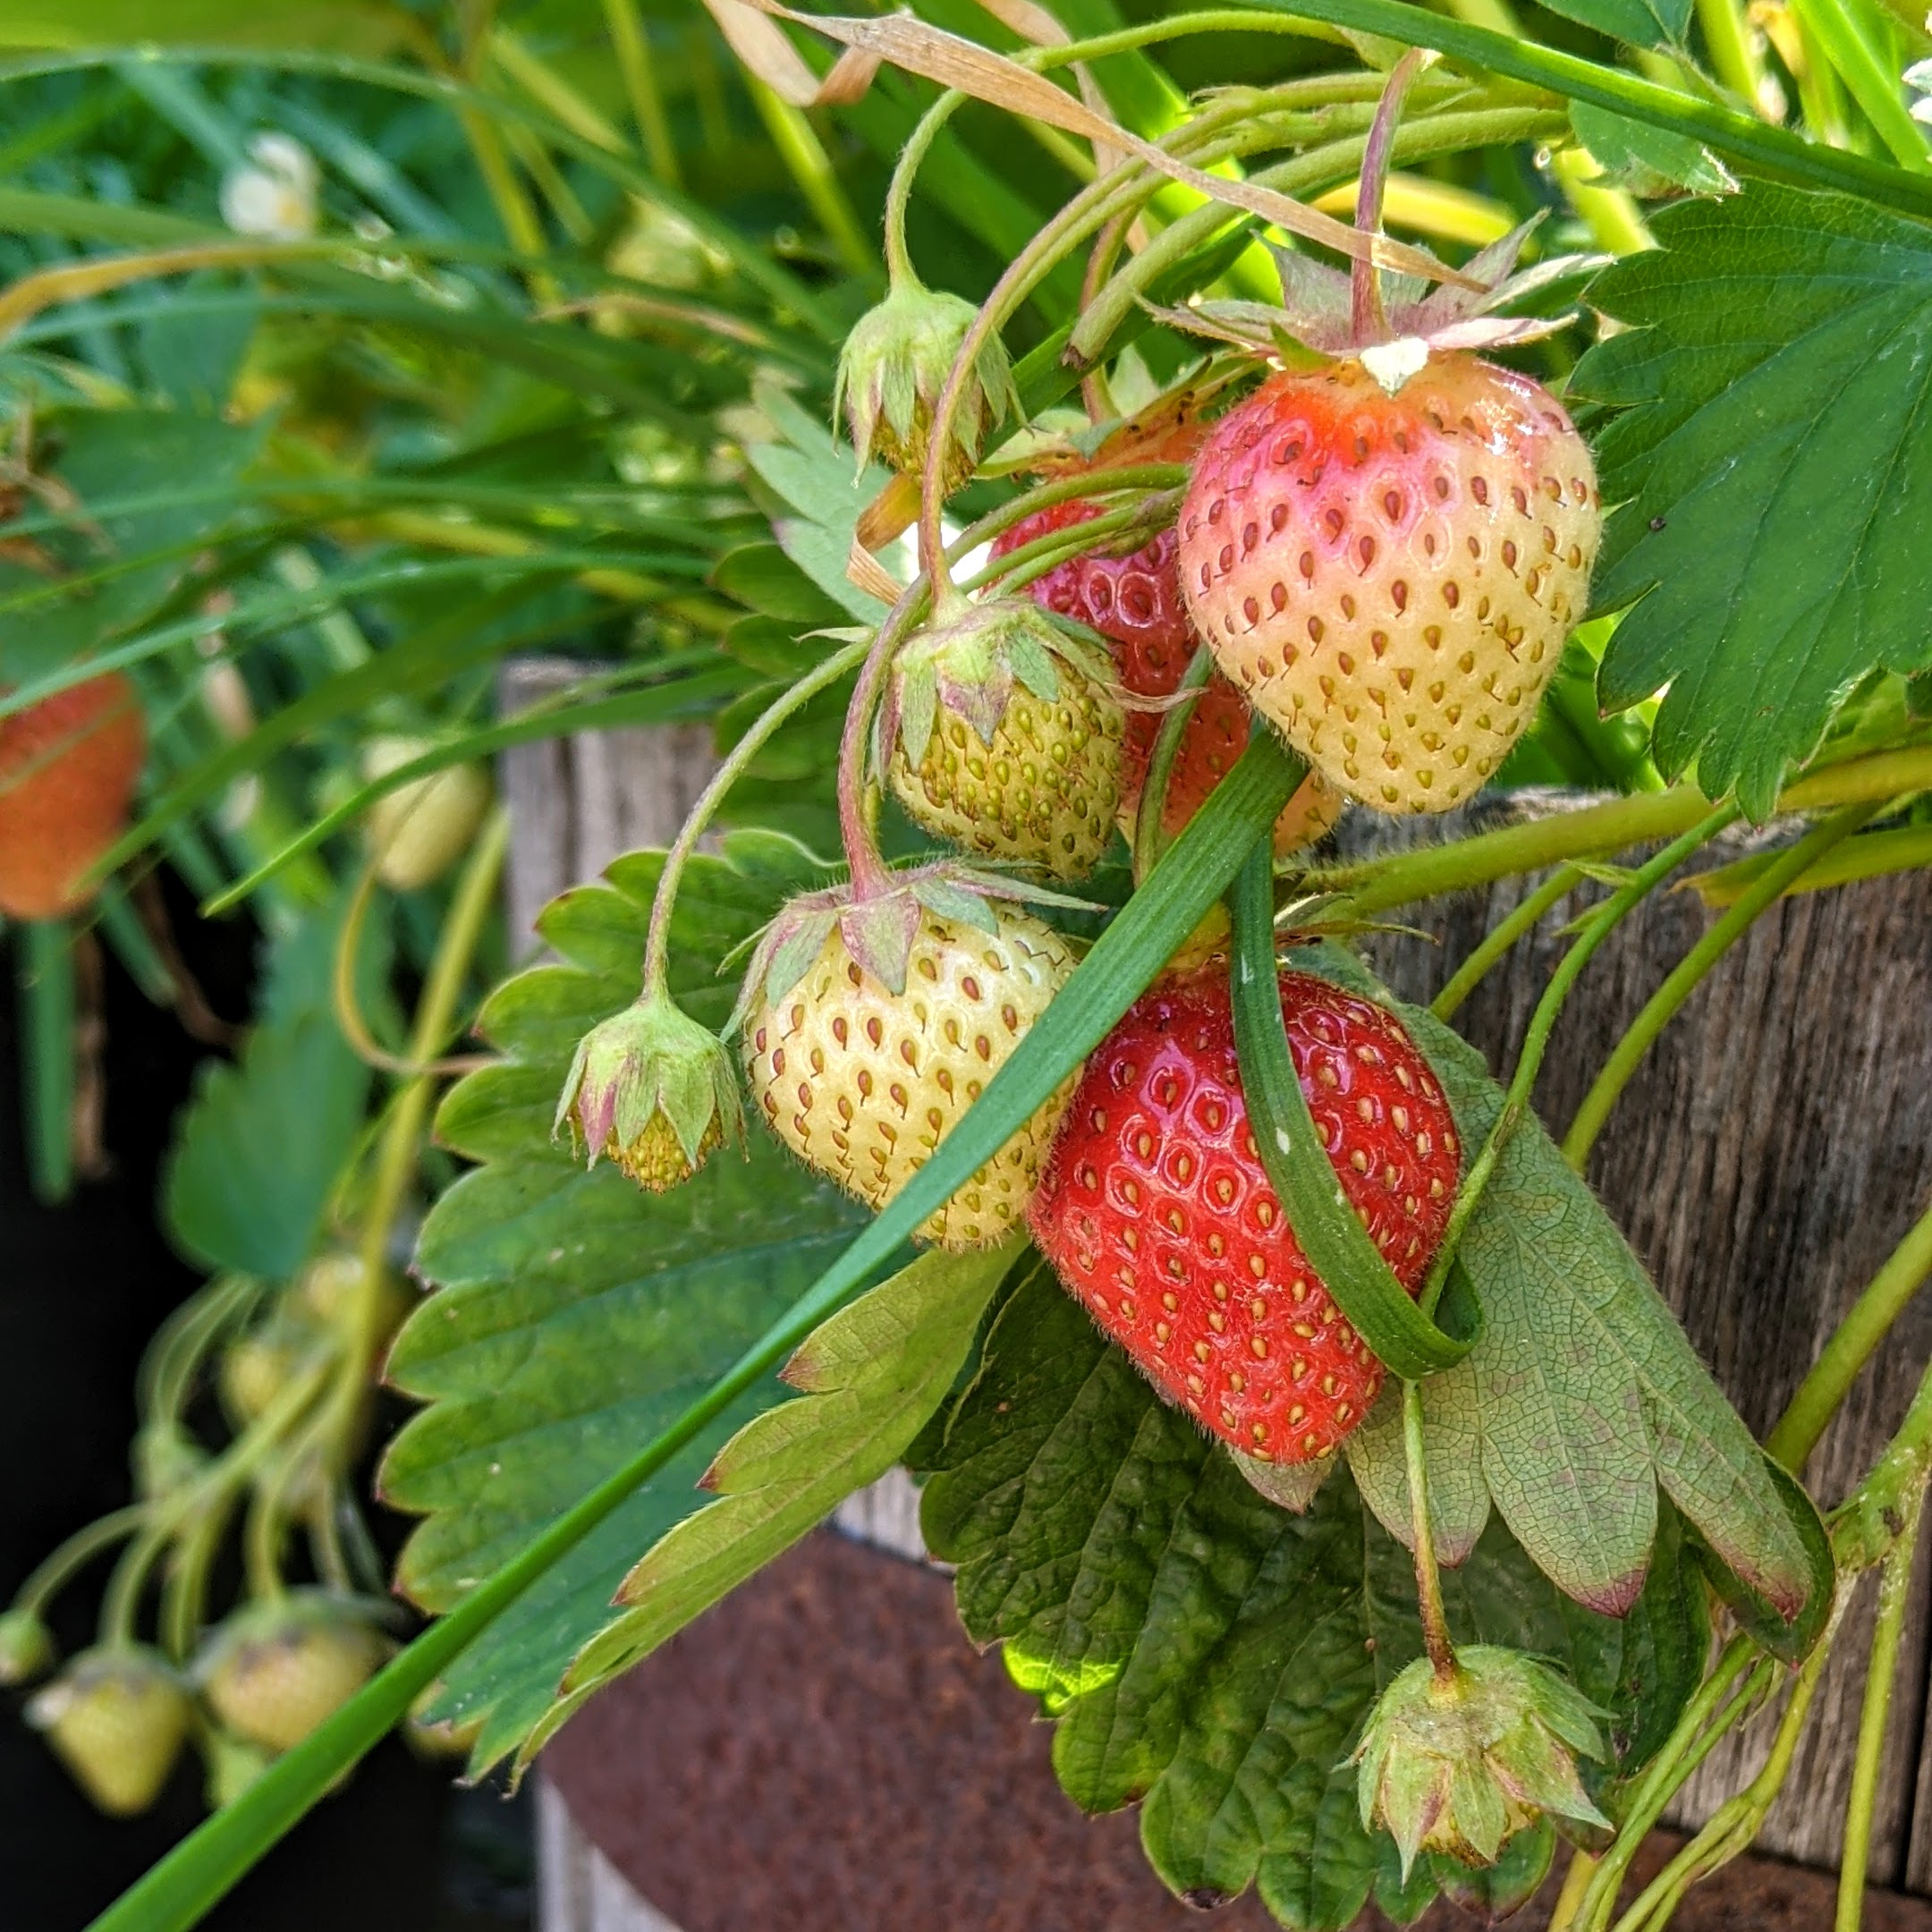 Strawberries ripening in a barrel in the Lawrence Barkman Vegetable Garden